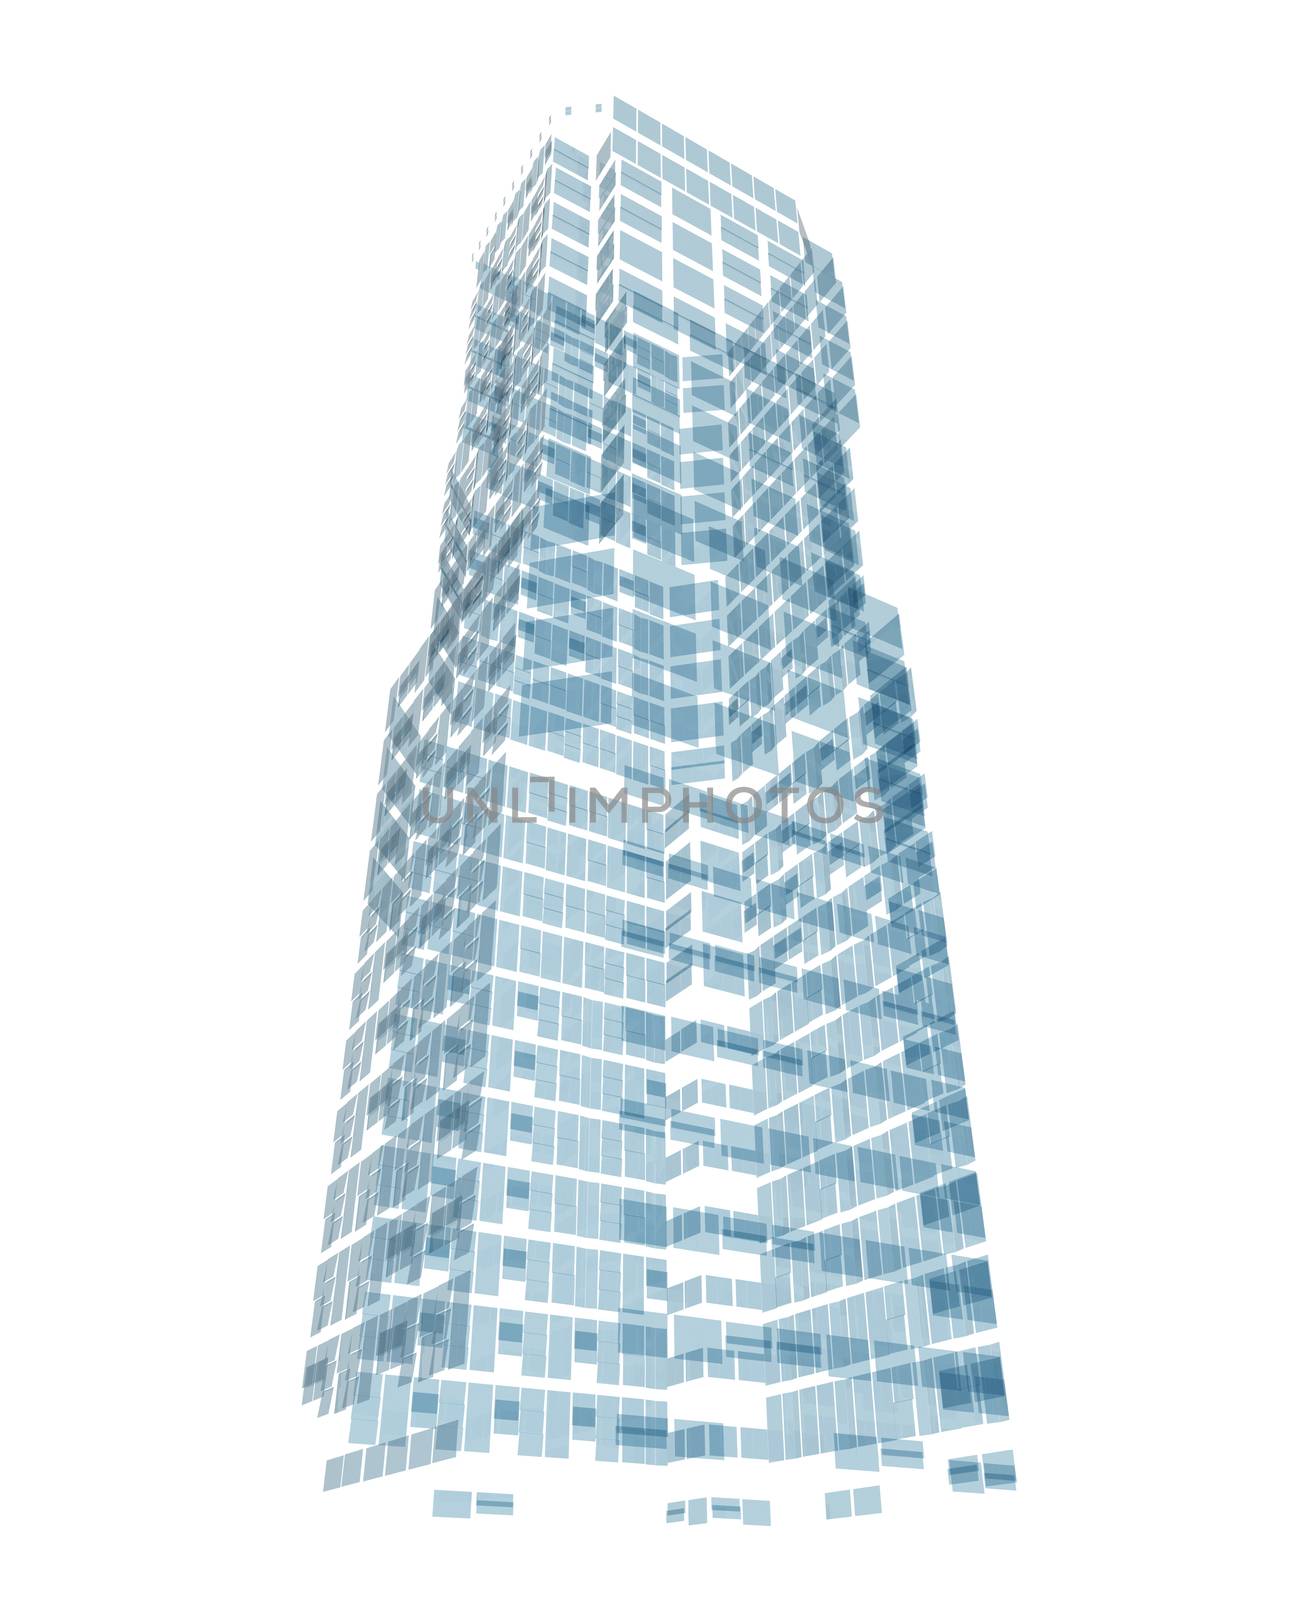 Abstract skyscraper consisting of blue planes by cherezoff